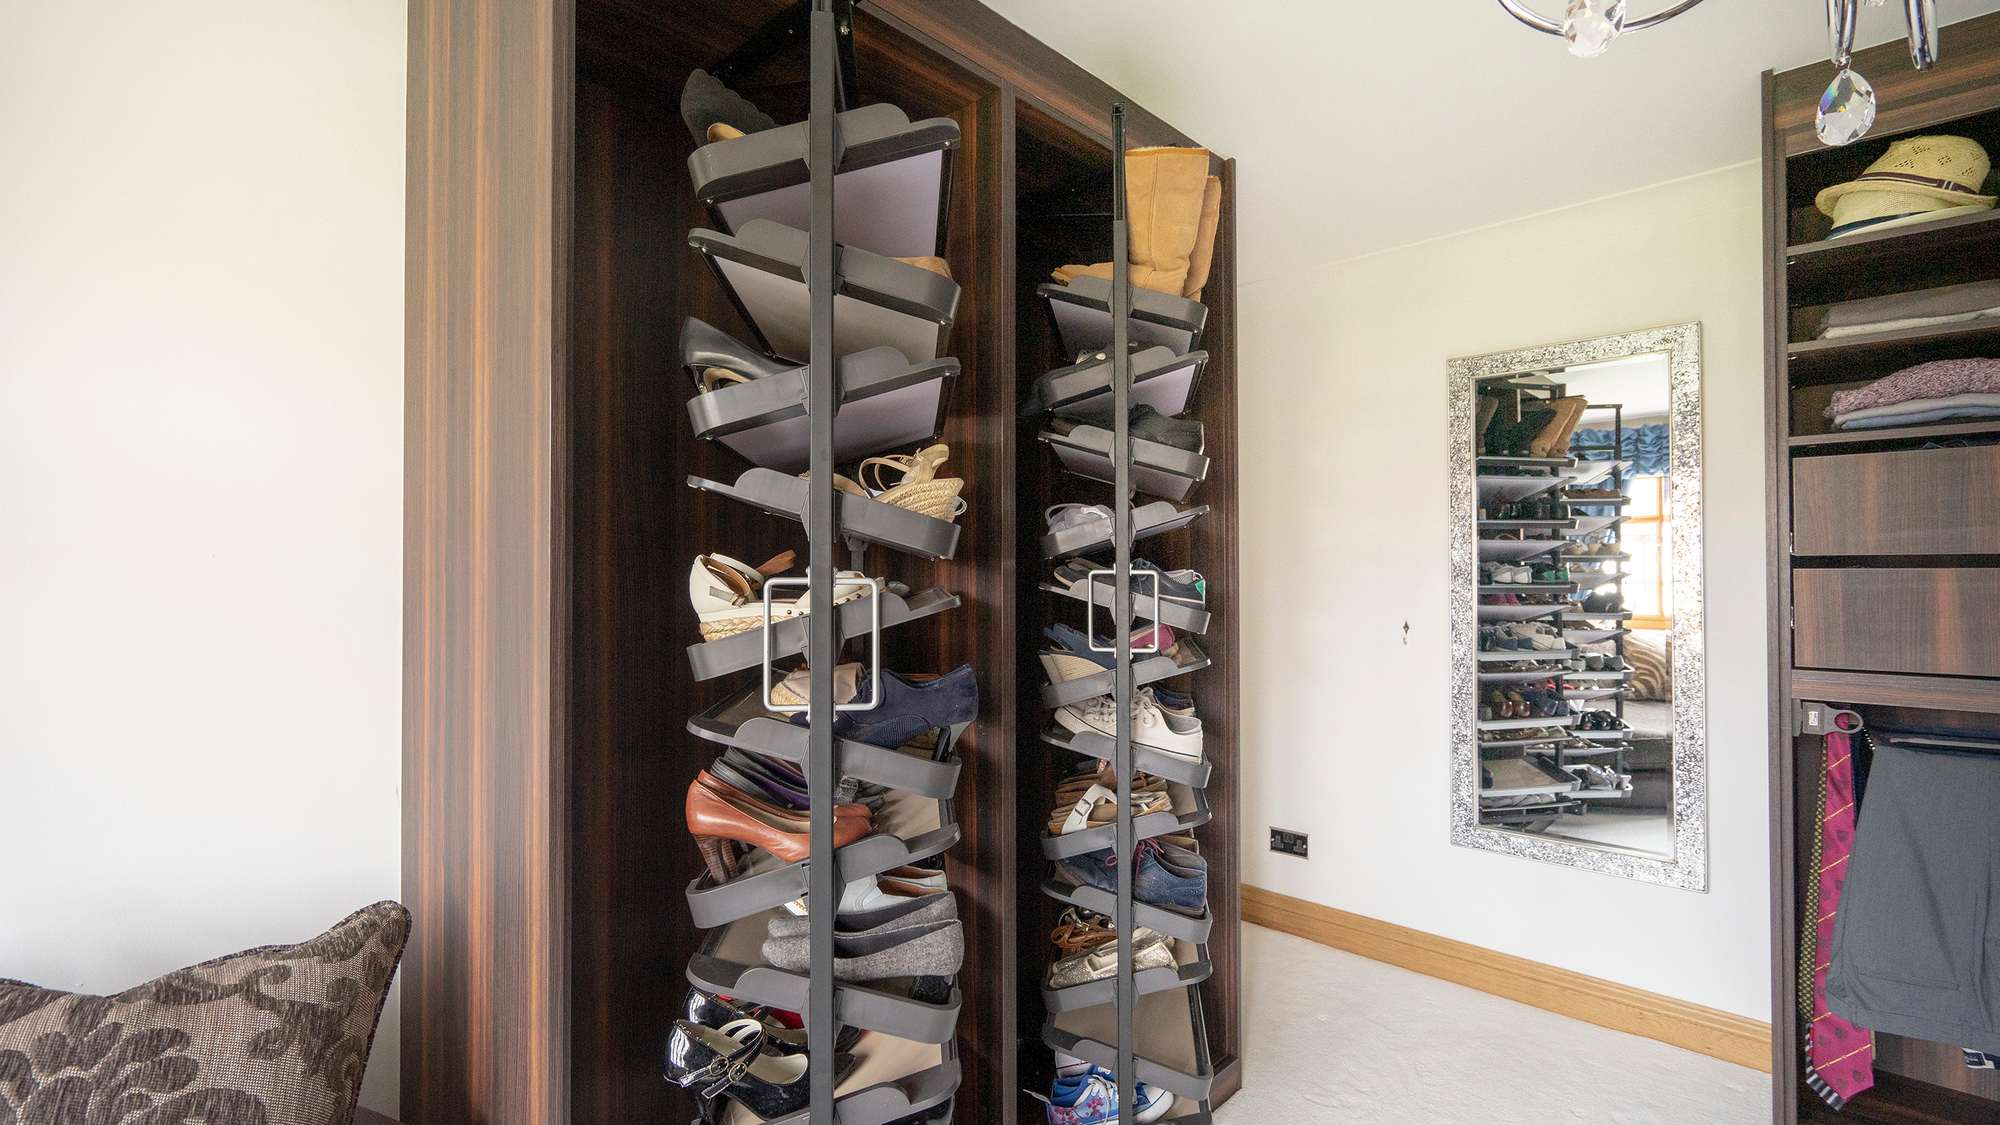 Detail shot of the rotating shoe racks in action.